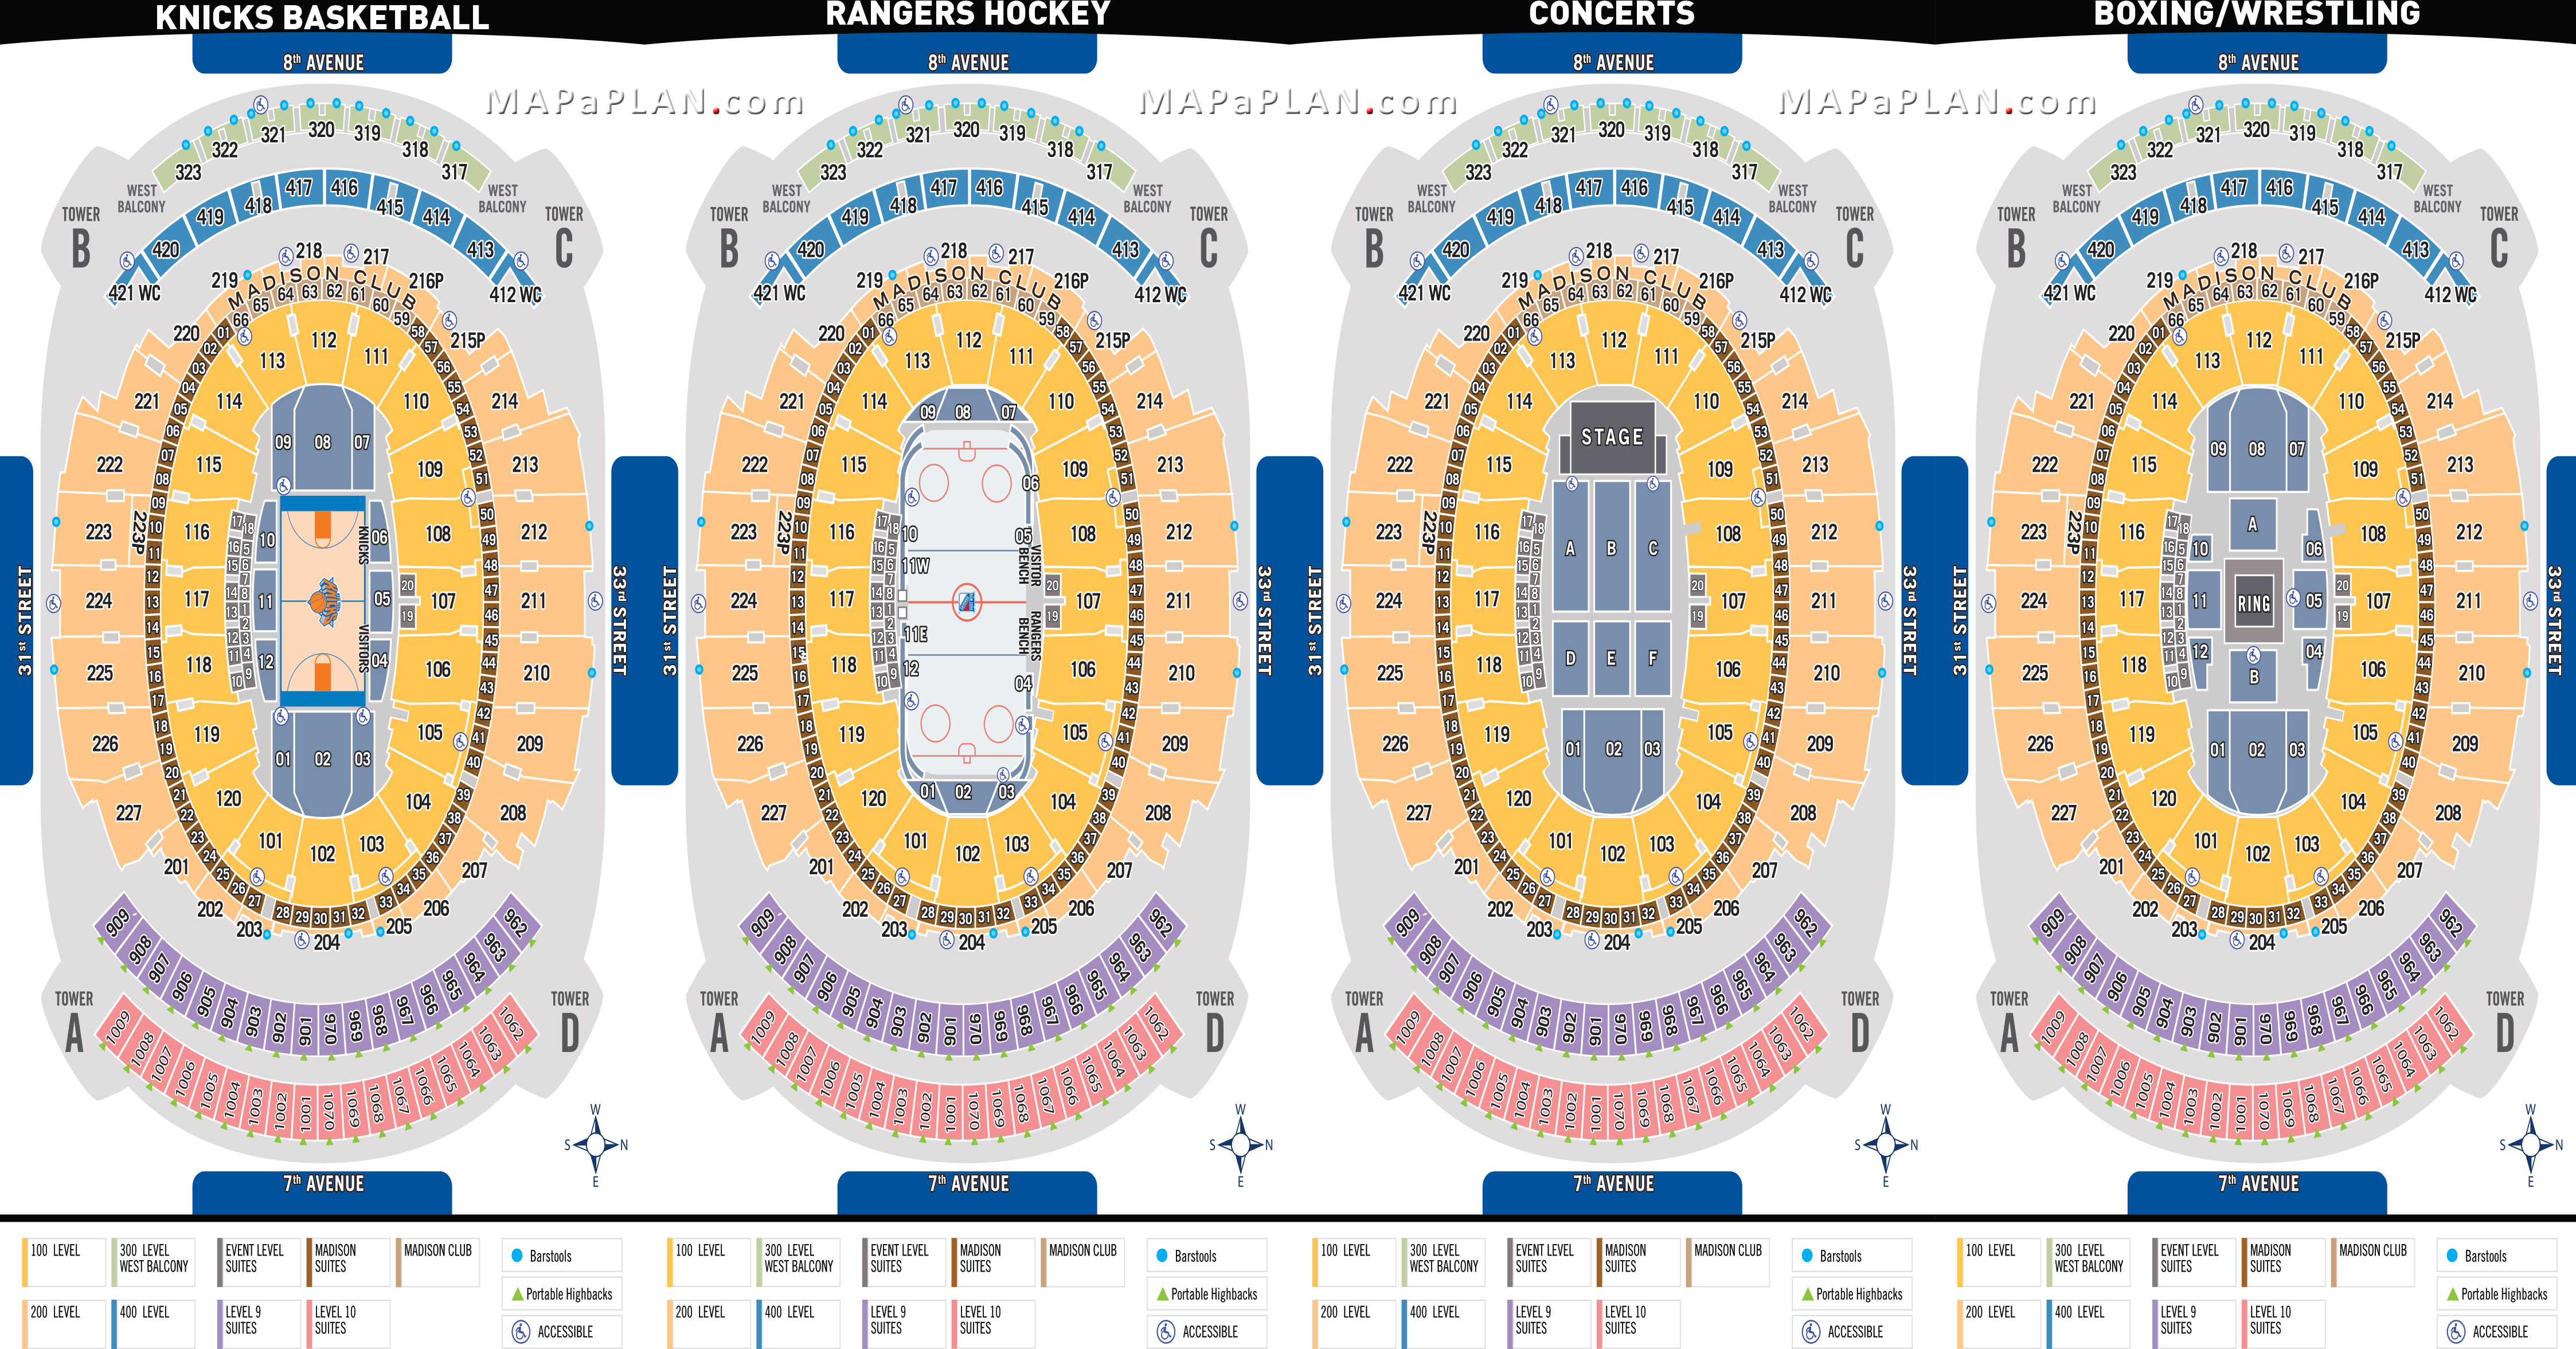 Madison square garden seating chart Street entrance official plans